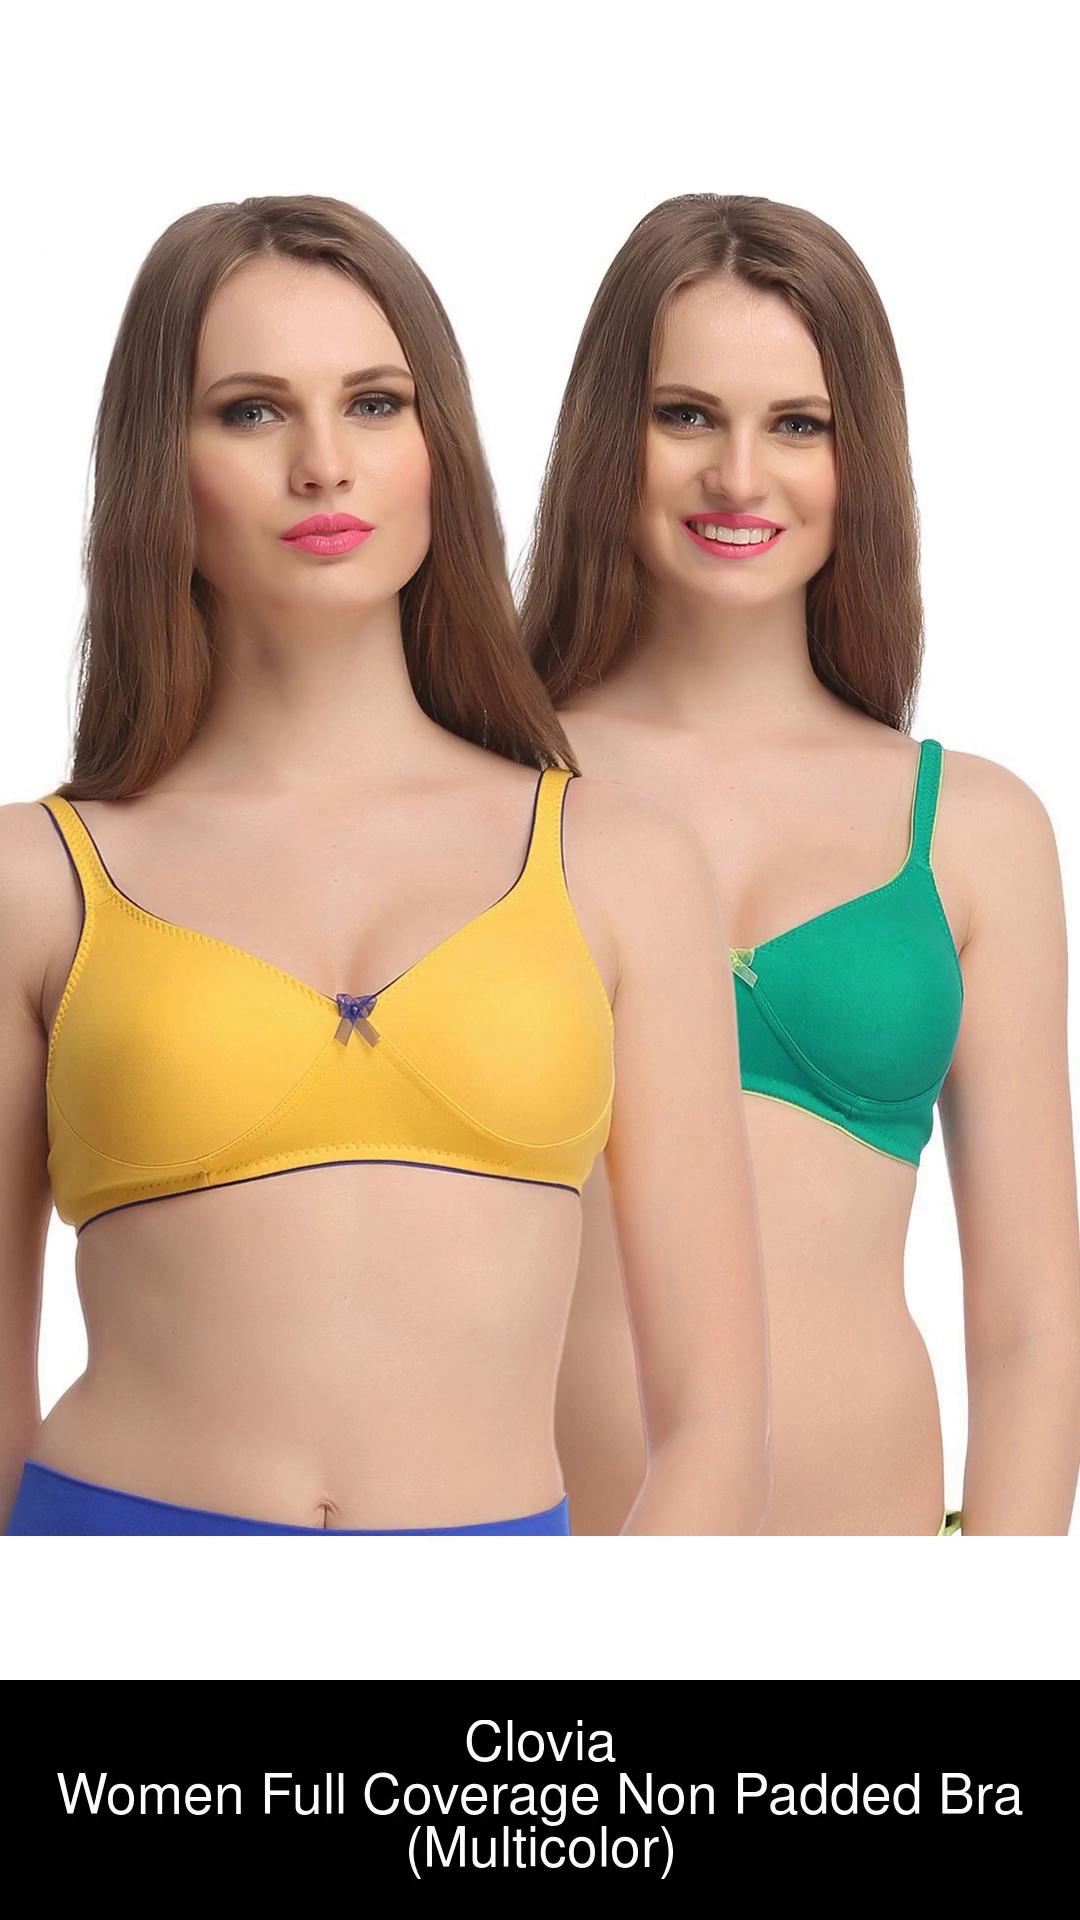 Clovia Women Full Coverage Non Padded Bra - Buy Multicolor Clovia Women  Full Coverage Non Padded Bra Online at Best Prices in India